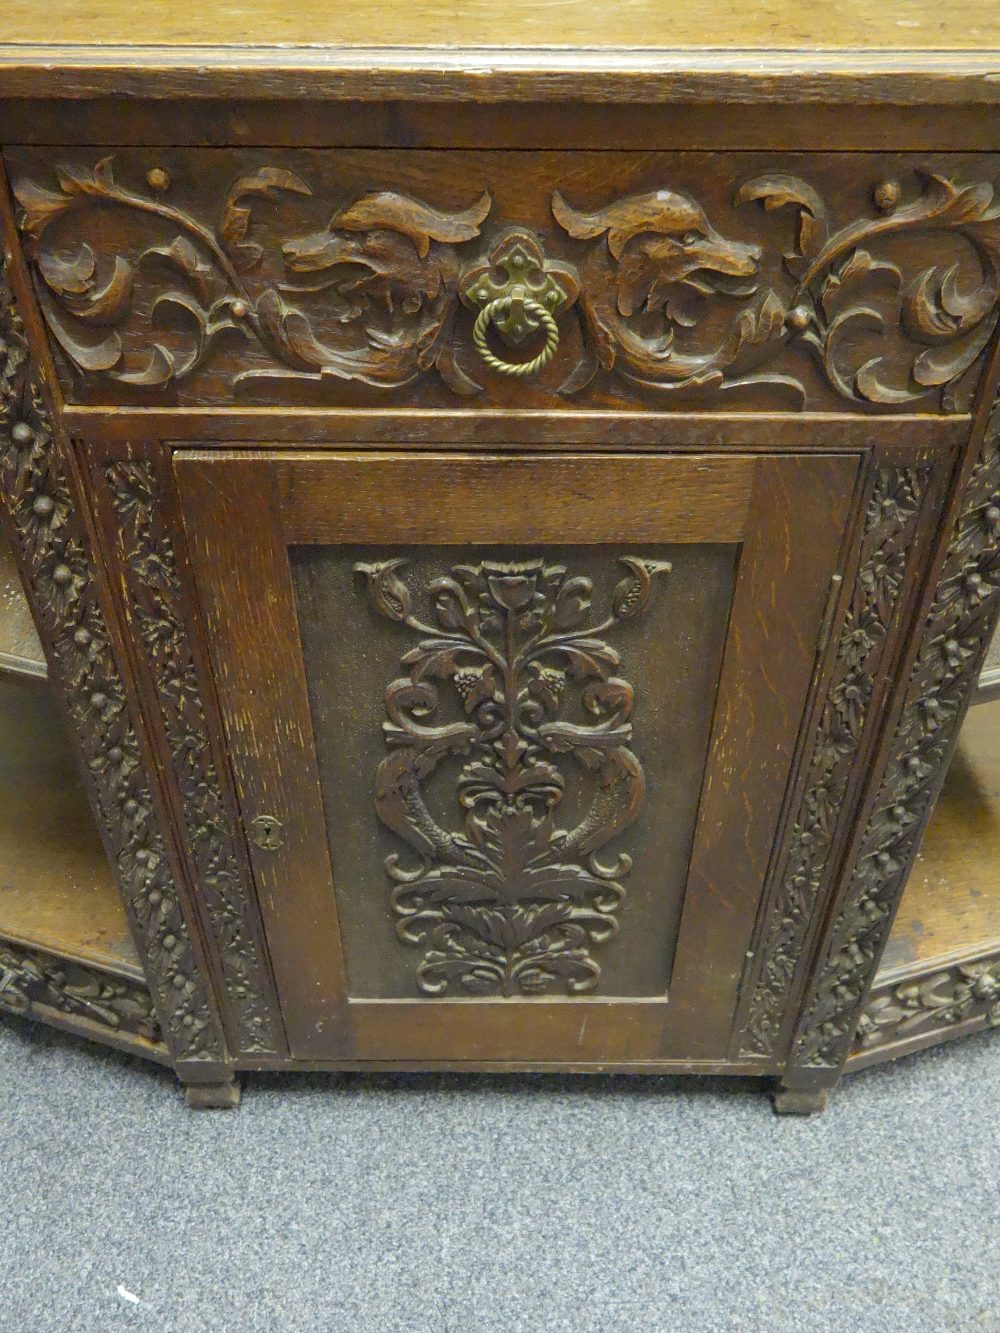 Delicate Arts & Crafts period profusely carved Chiffonier with a carved decorative back and 2 panels - Image 3 of 3